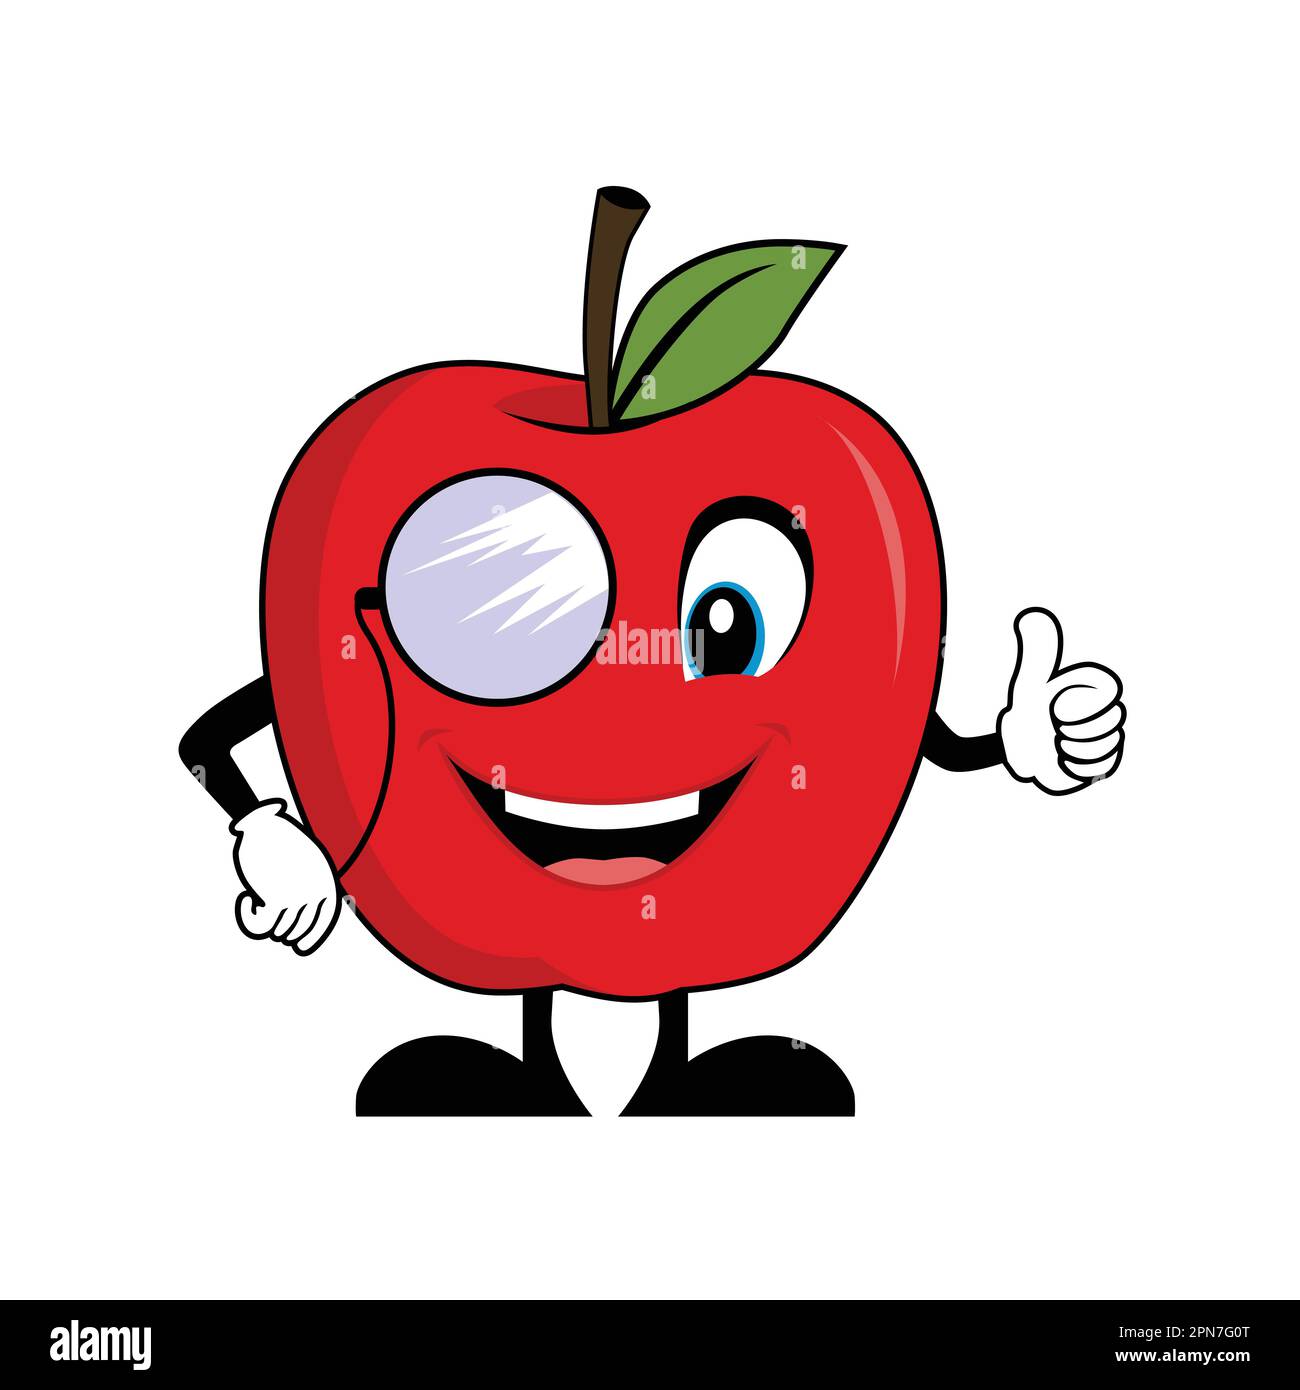 Red Apple Cartoon Character with Sunglasses Giving Thumbs Up. Suitable for poster, banner, web, icon, mascot, background Stock Vector